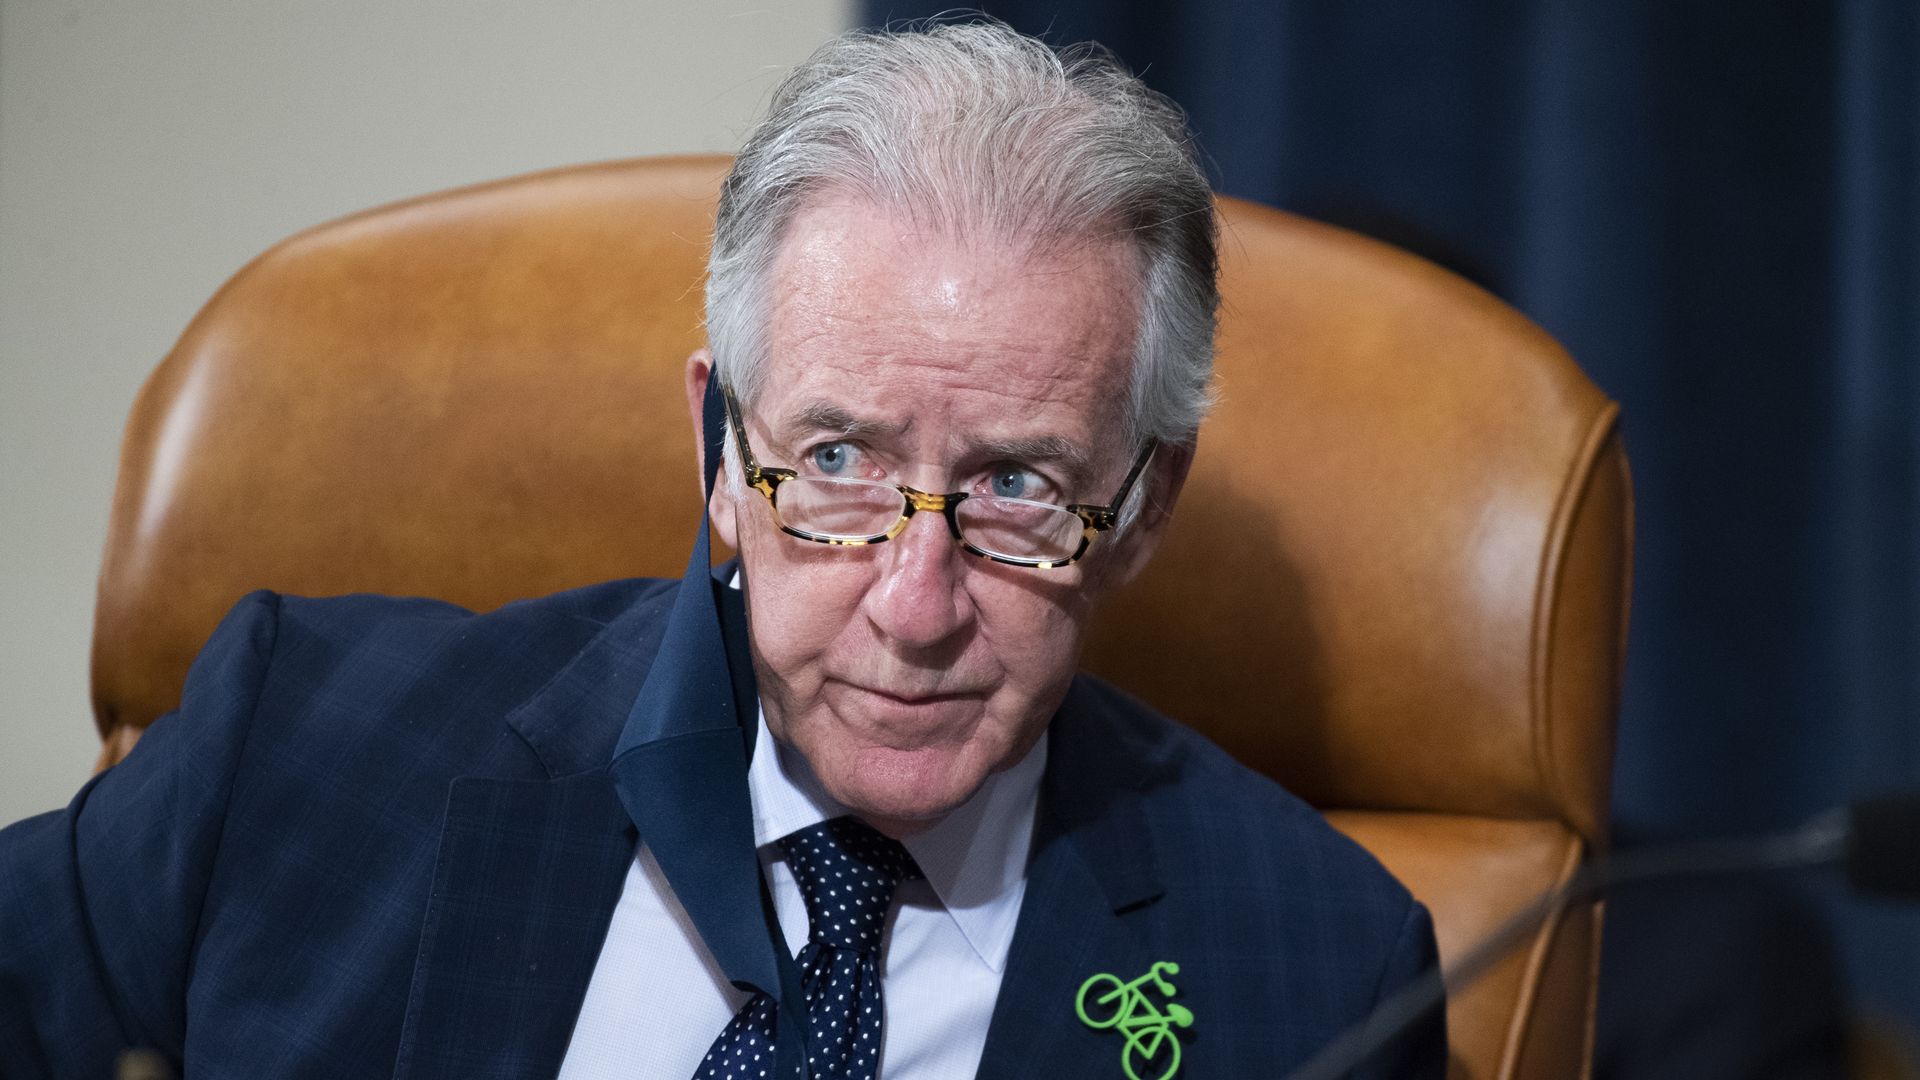 Chairman Richard Neal, D-Mass., conducts the Ways and Means Committee markup of the Build Back Better Act in Longworth Building on Tuesday, September 14